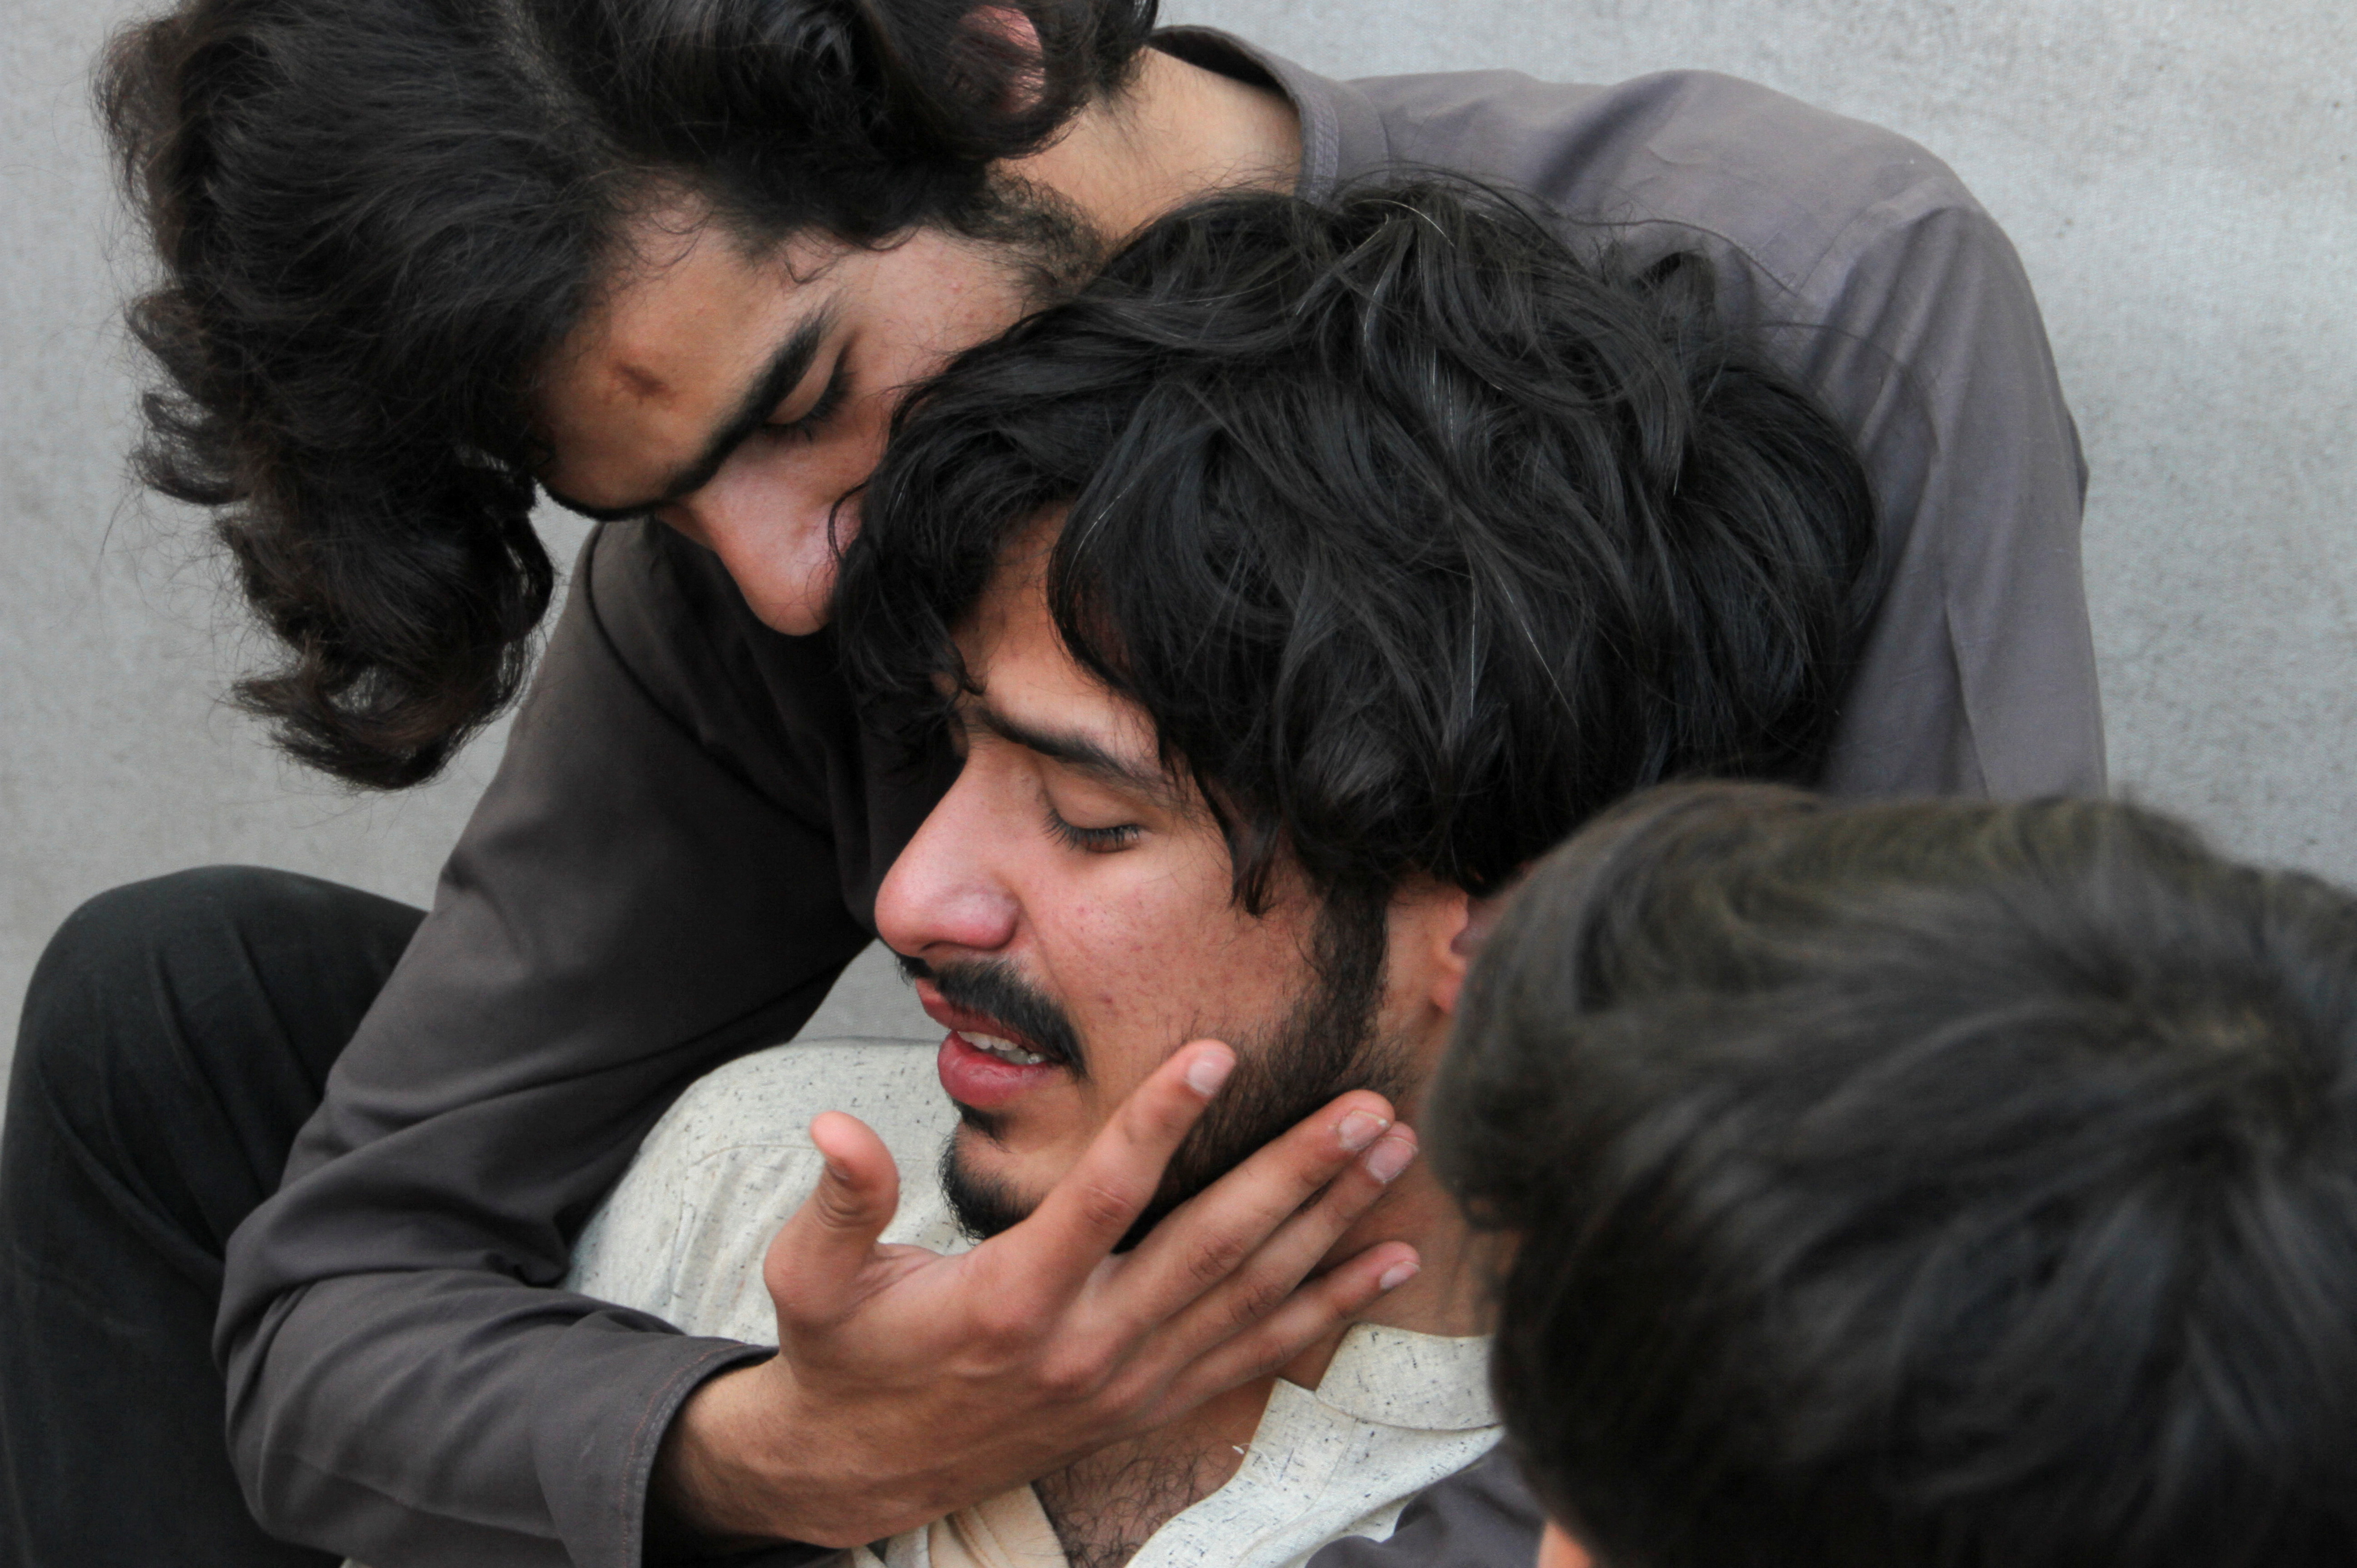 Relatives of the victims comfort each other, after a bomb blast in a mosque during Friday prayers in Peshawar